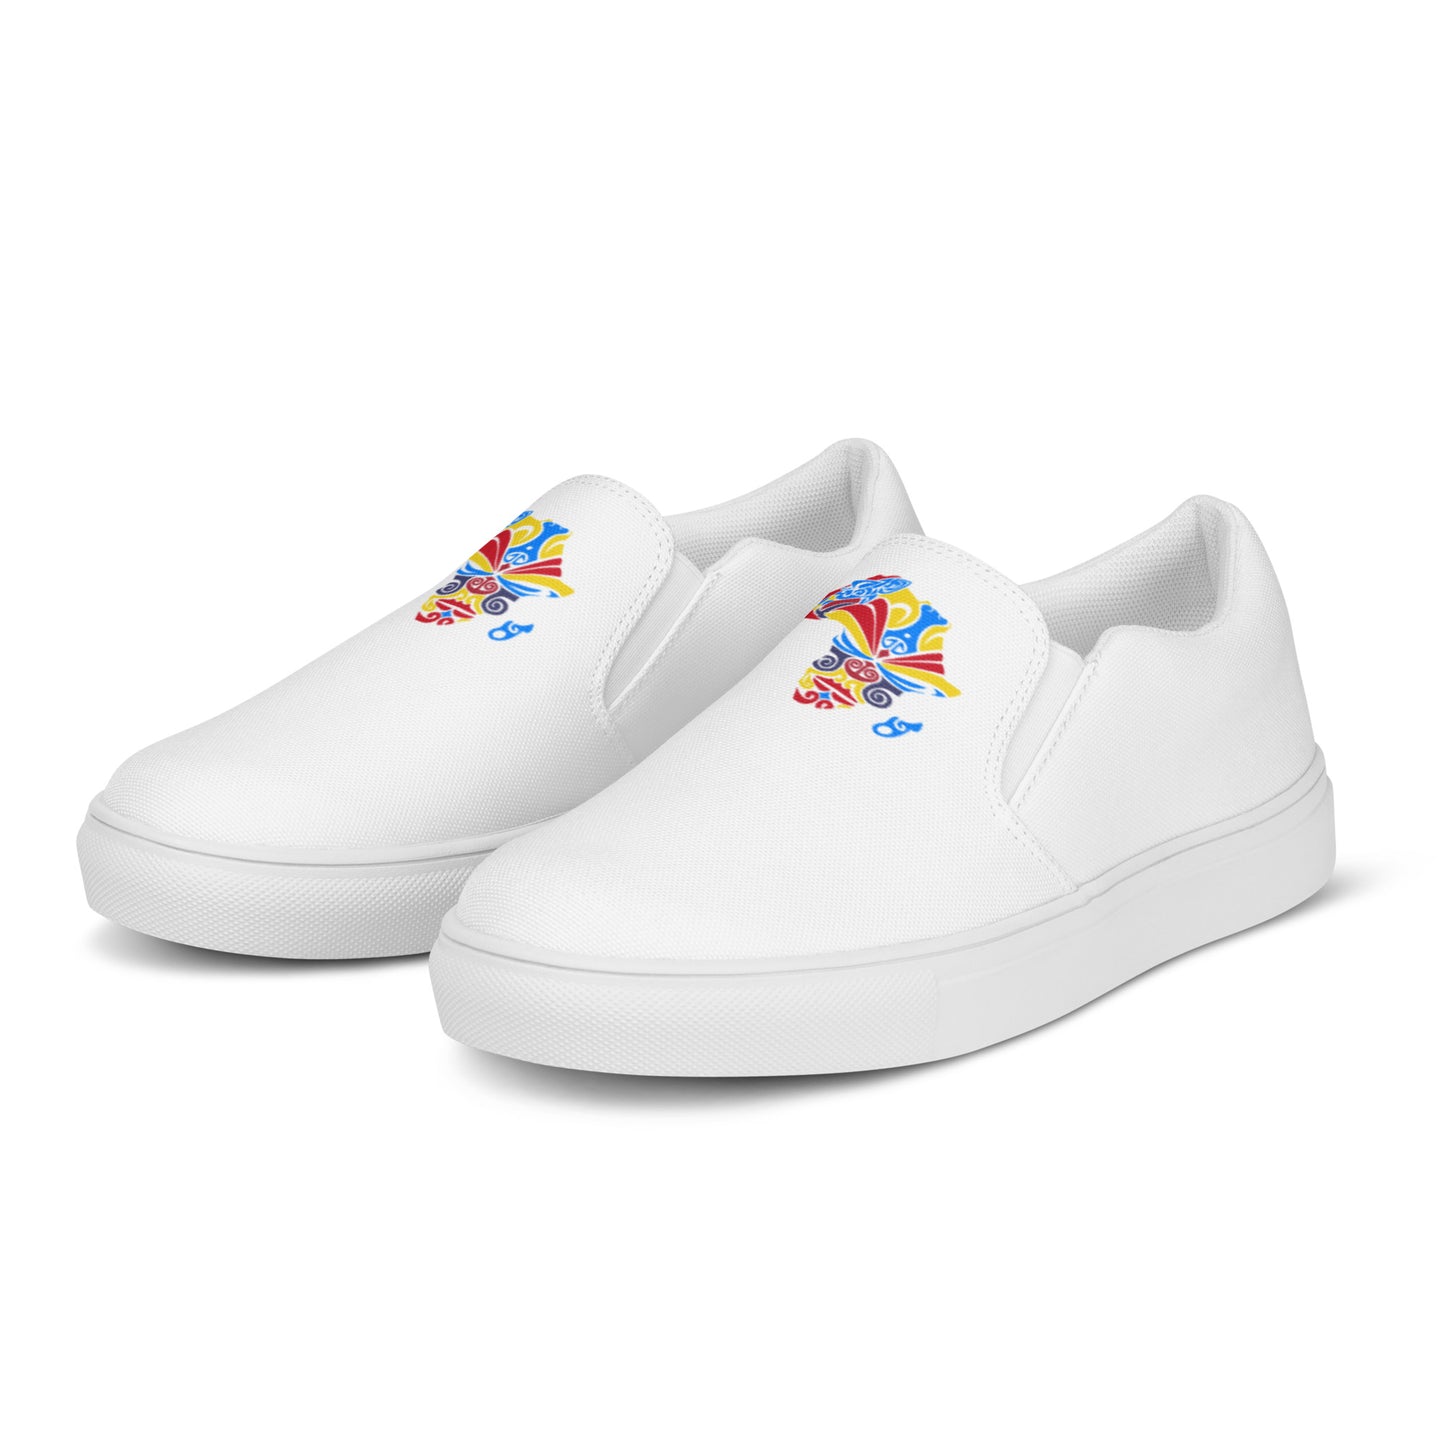 Women’s Slip-on Canvas Shoes - Banamerica Collection